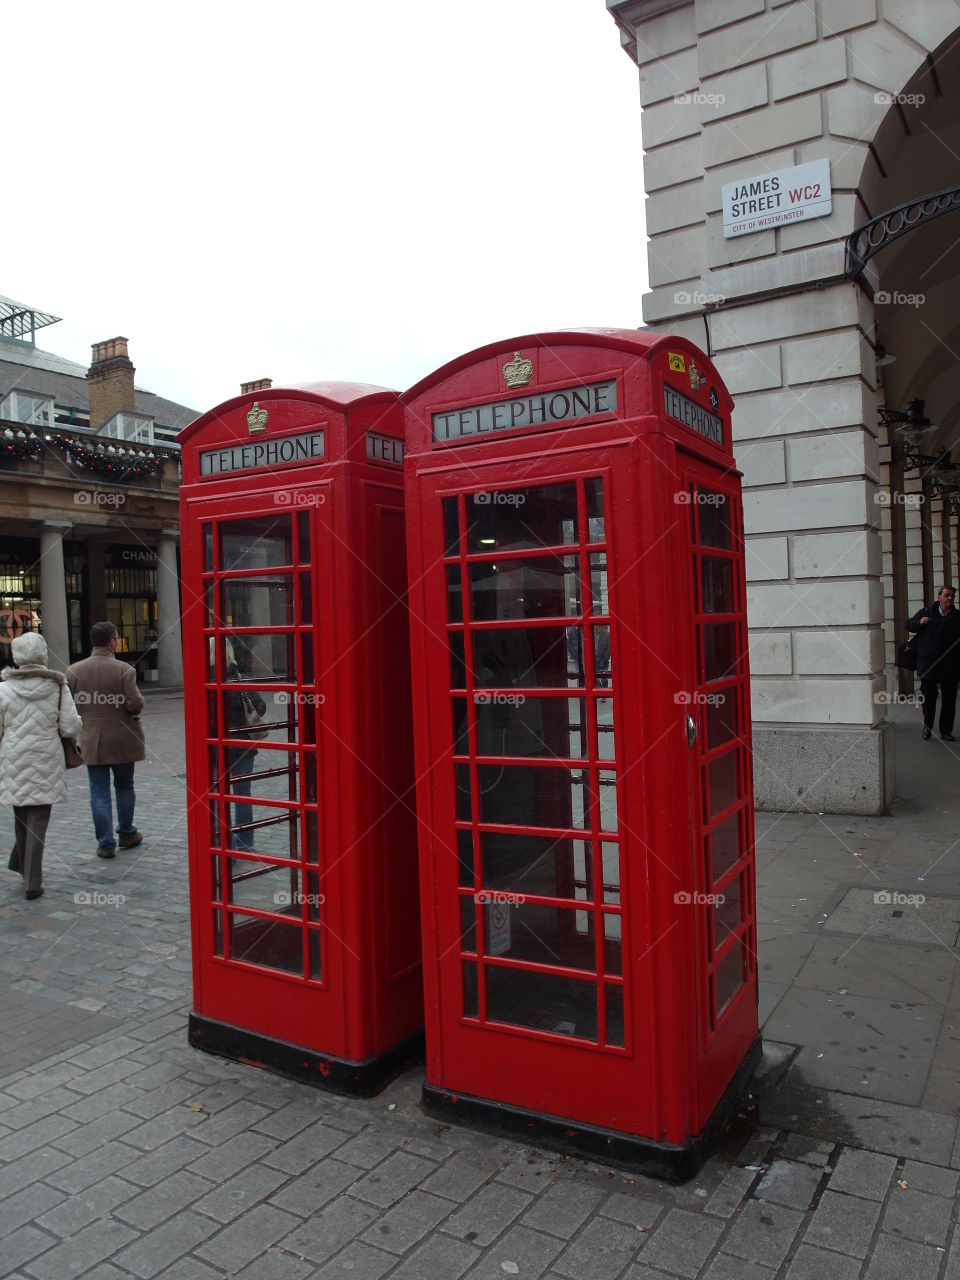 Red phone booth